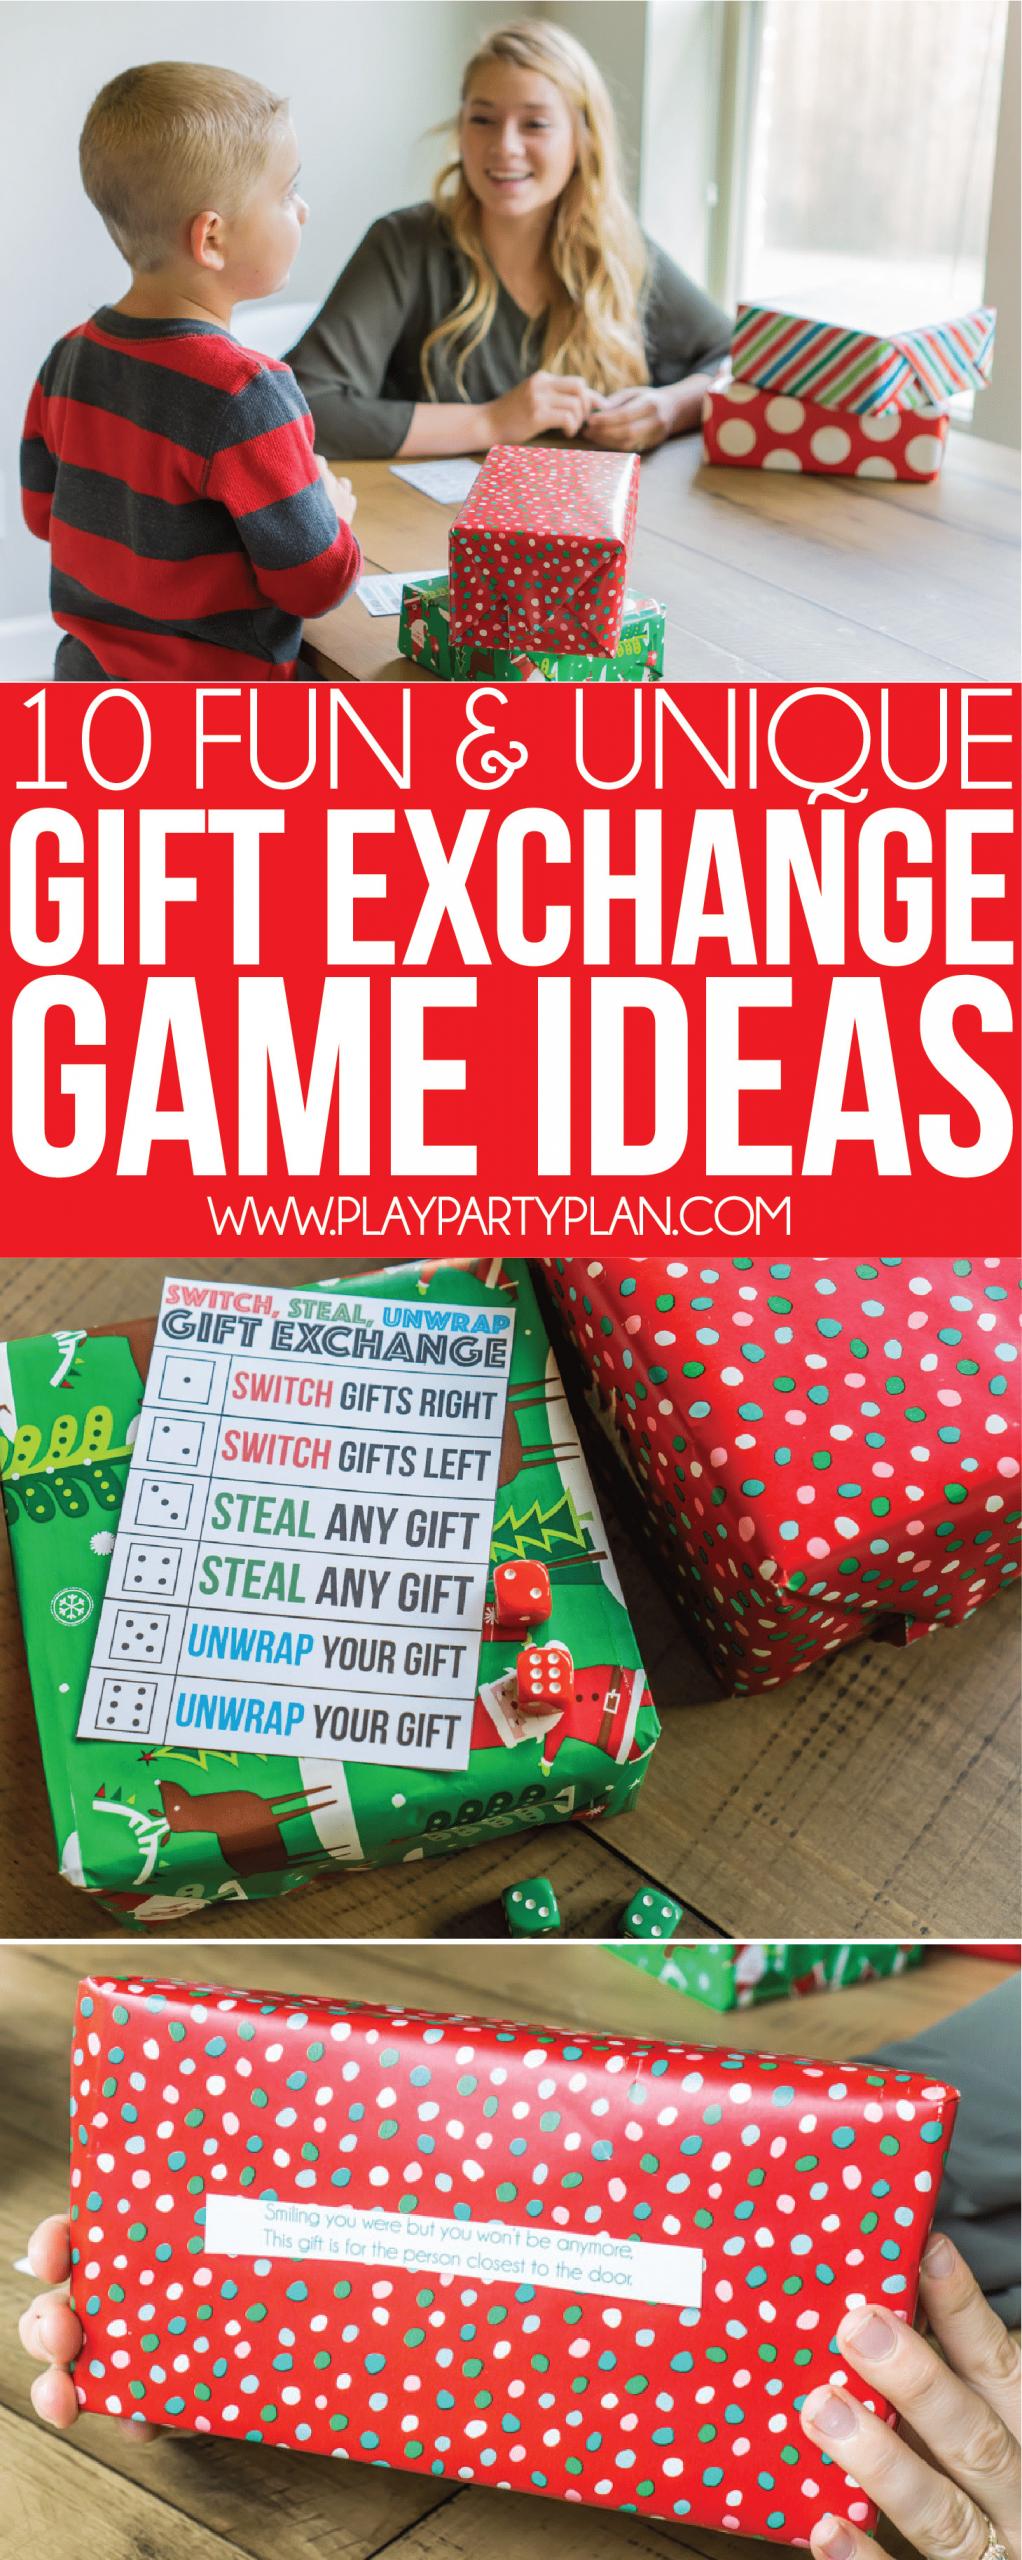 Couples Gift Exchange Ideas
 12 Best Christmas Gift Exchange Games Play Party Plan